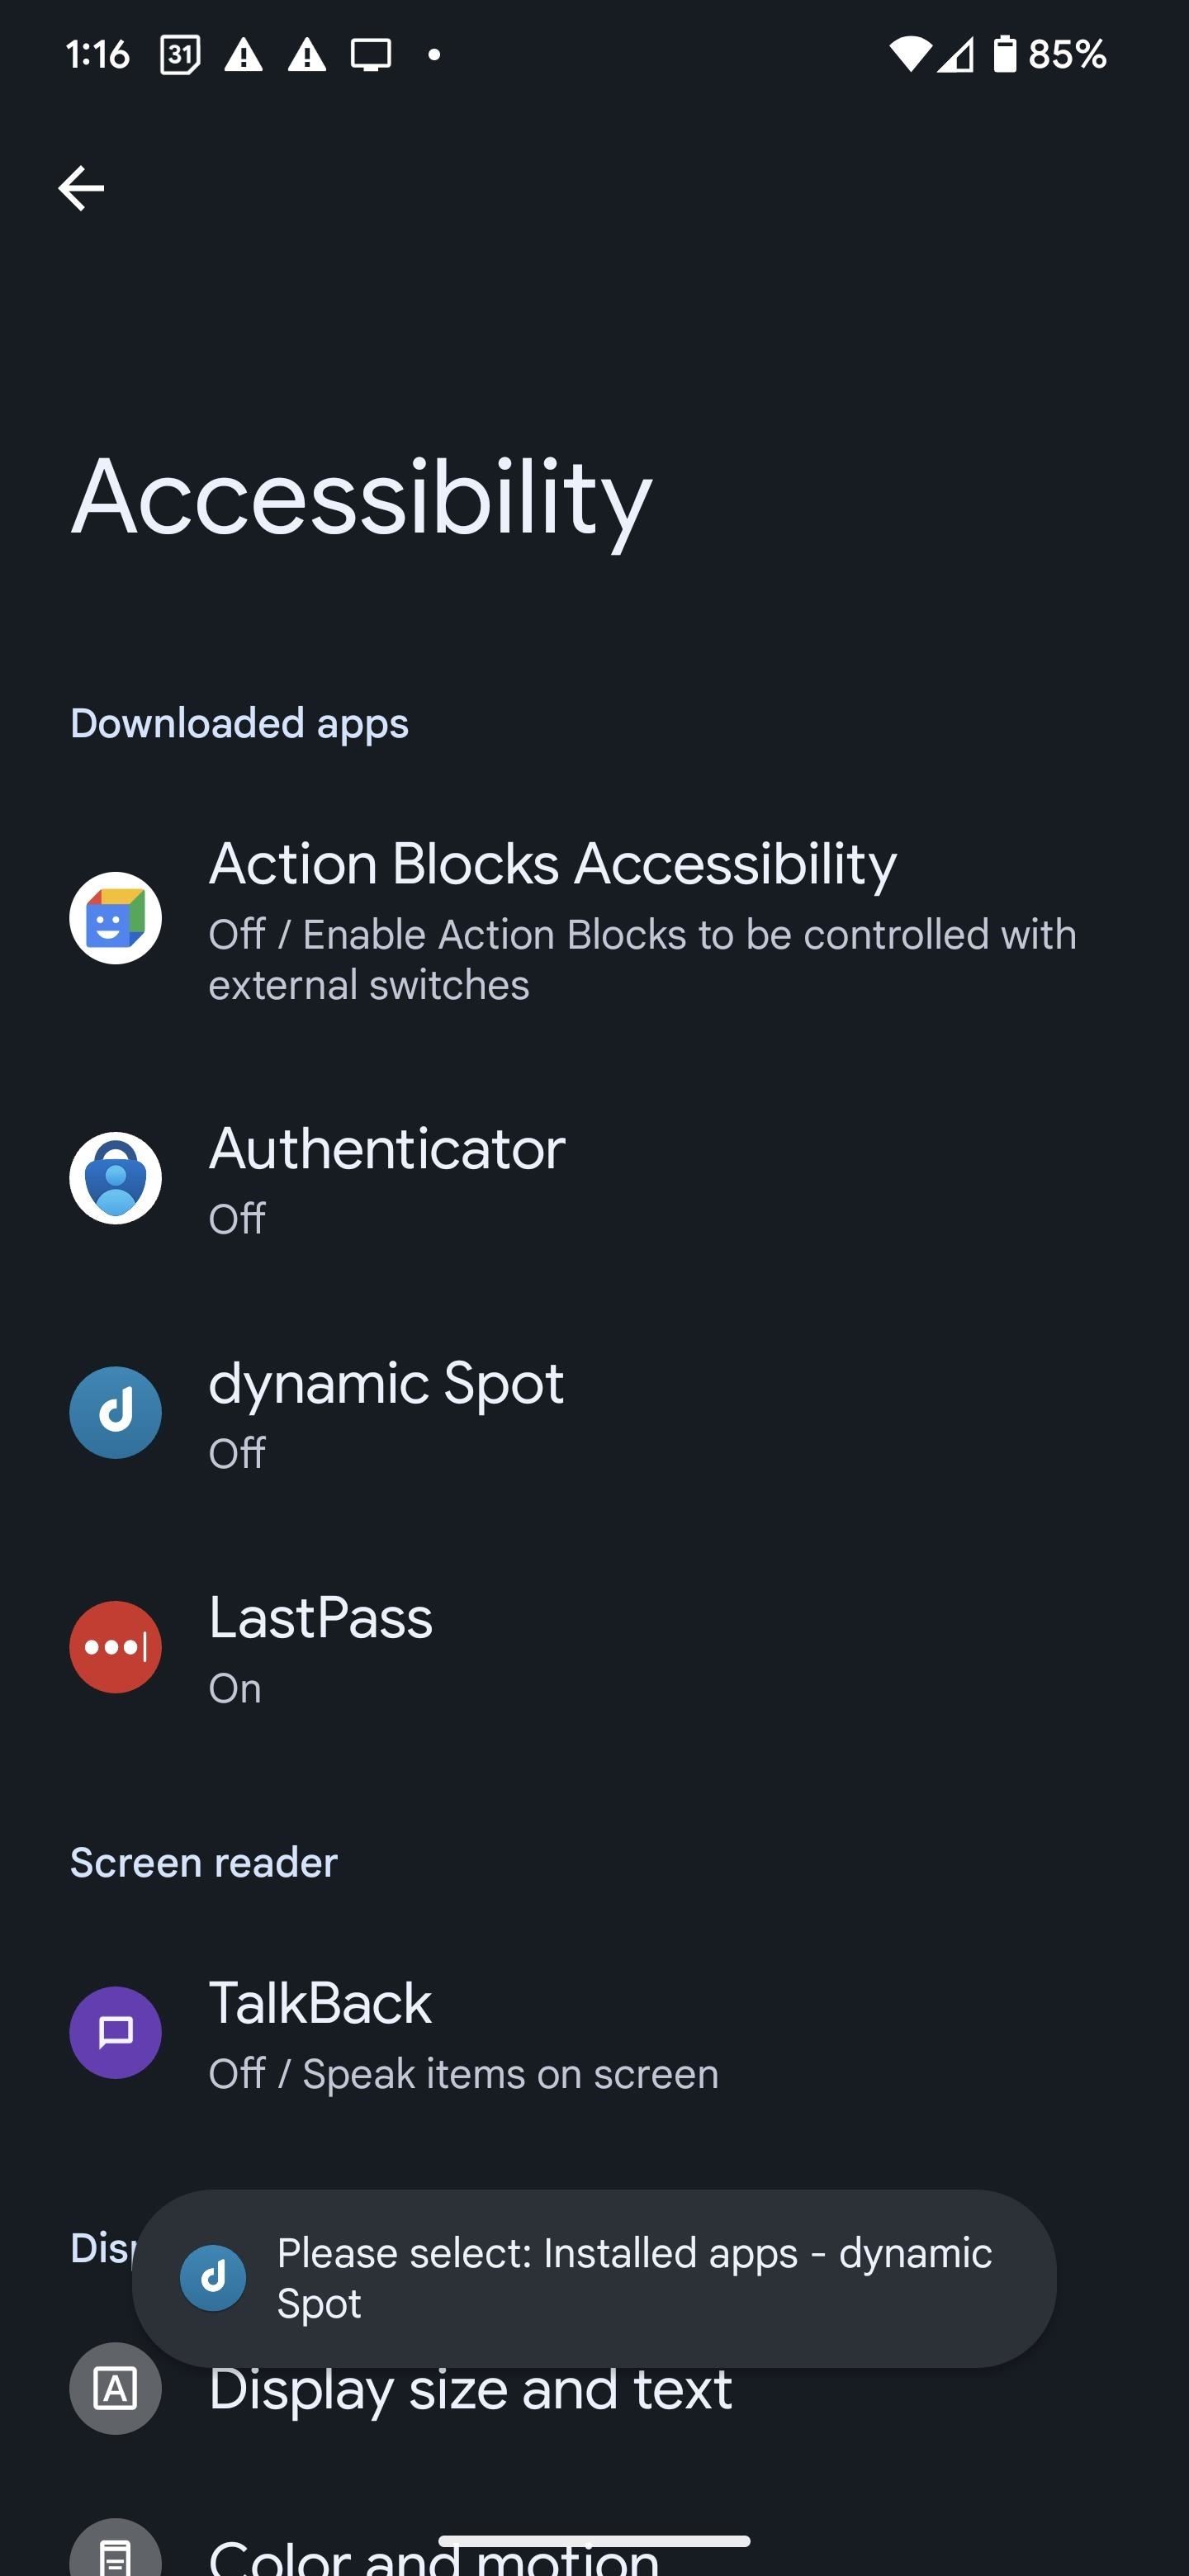 Get iPhone's Dynamic Island on Your Android Phone for Quick Access to Notifications, Alerts, and Activities